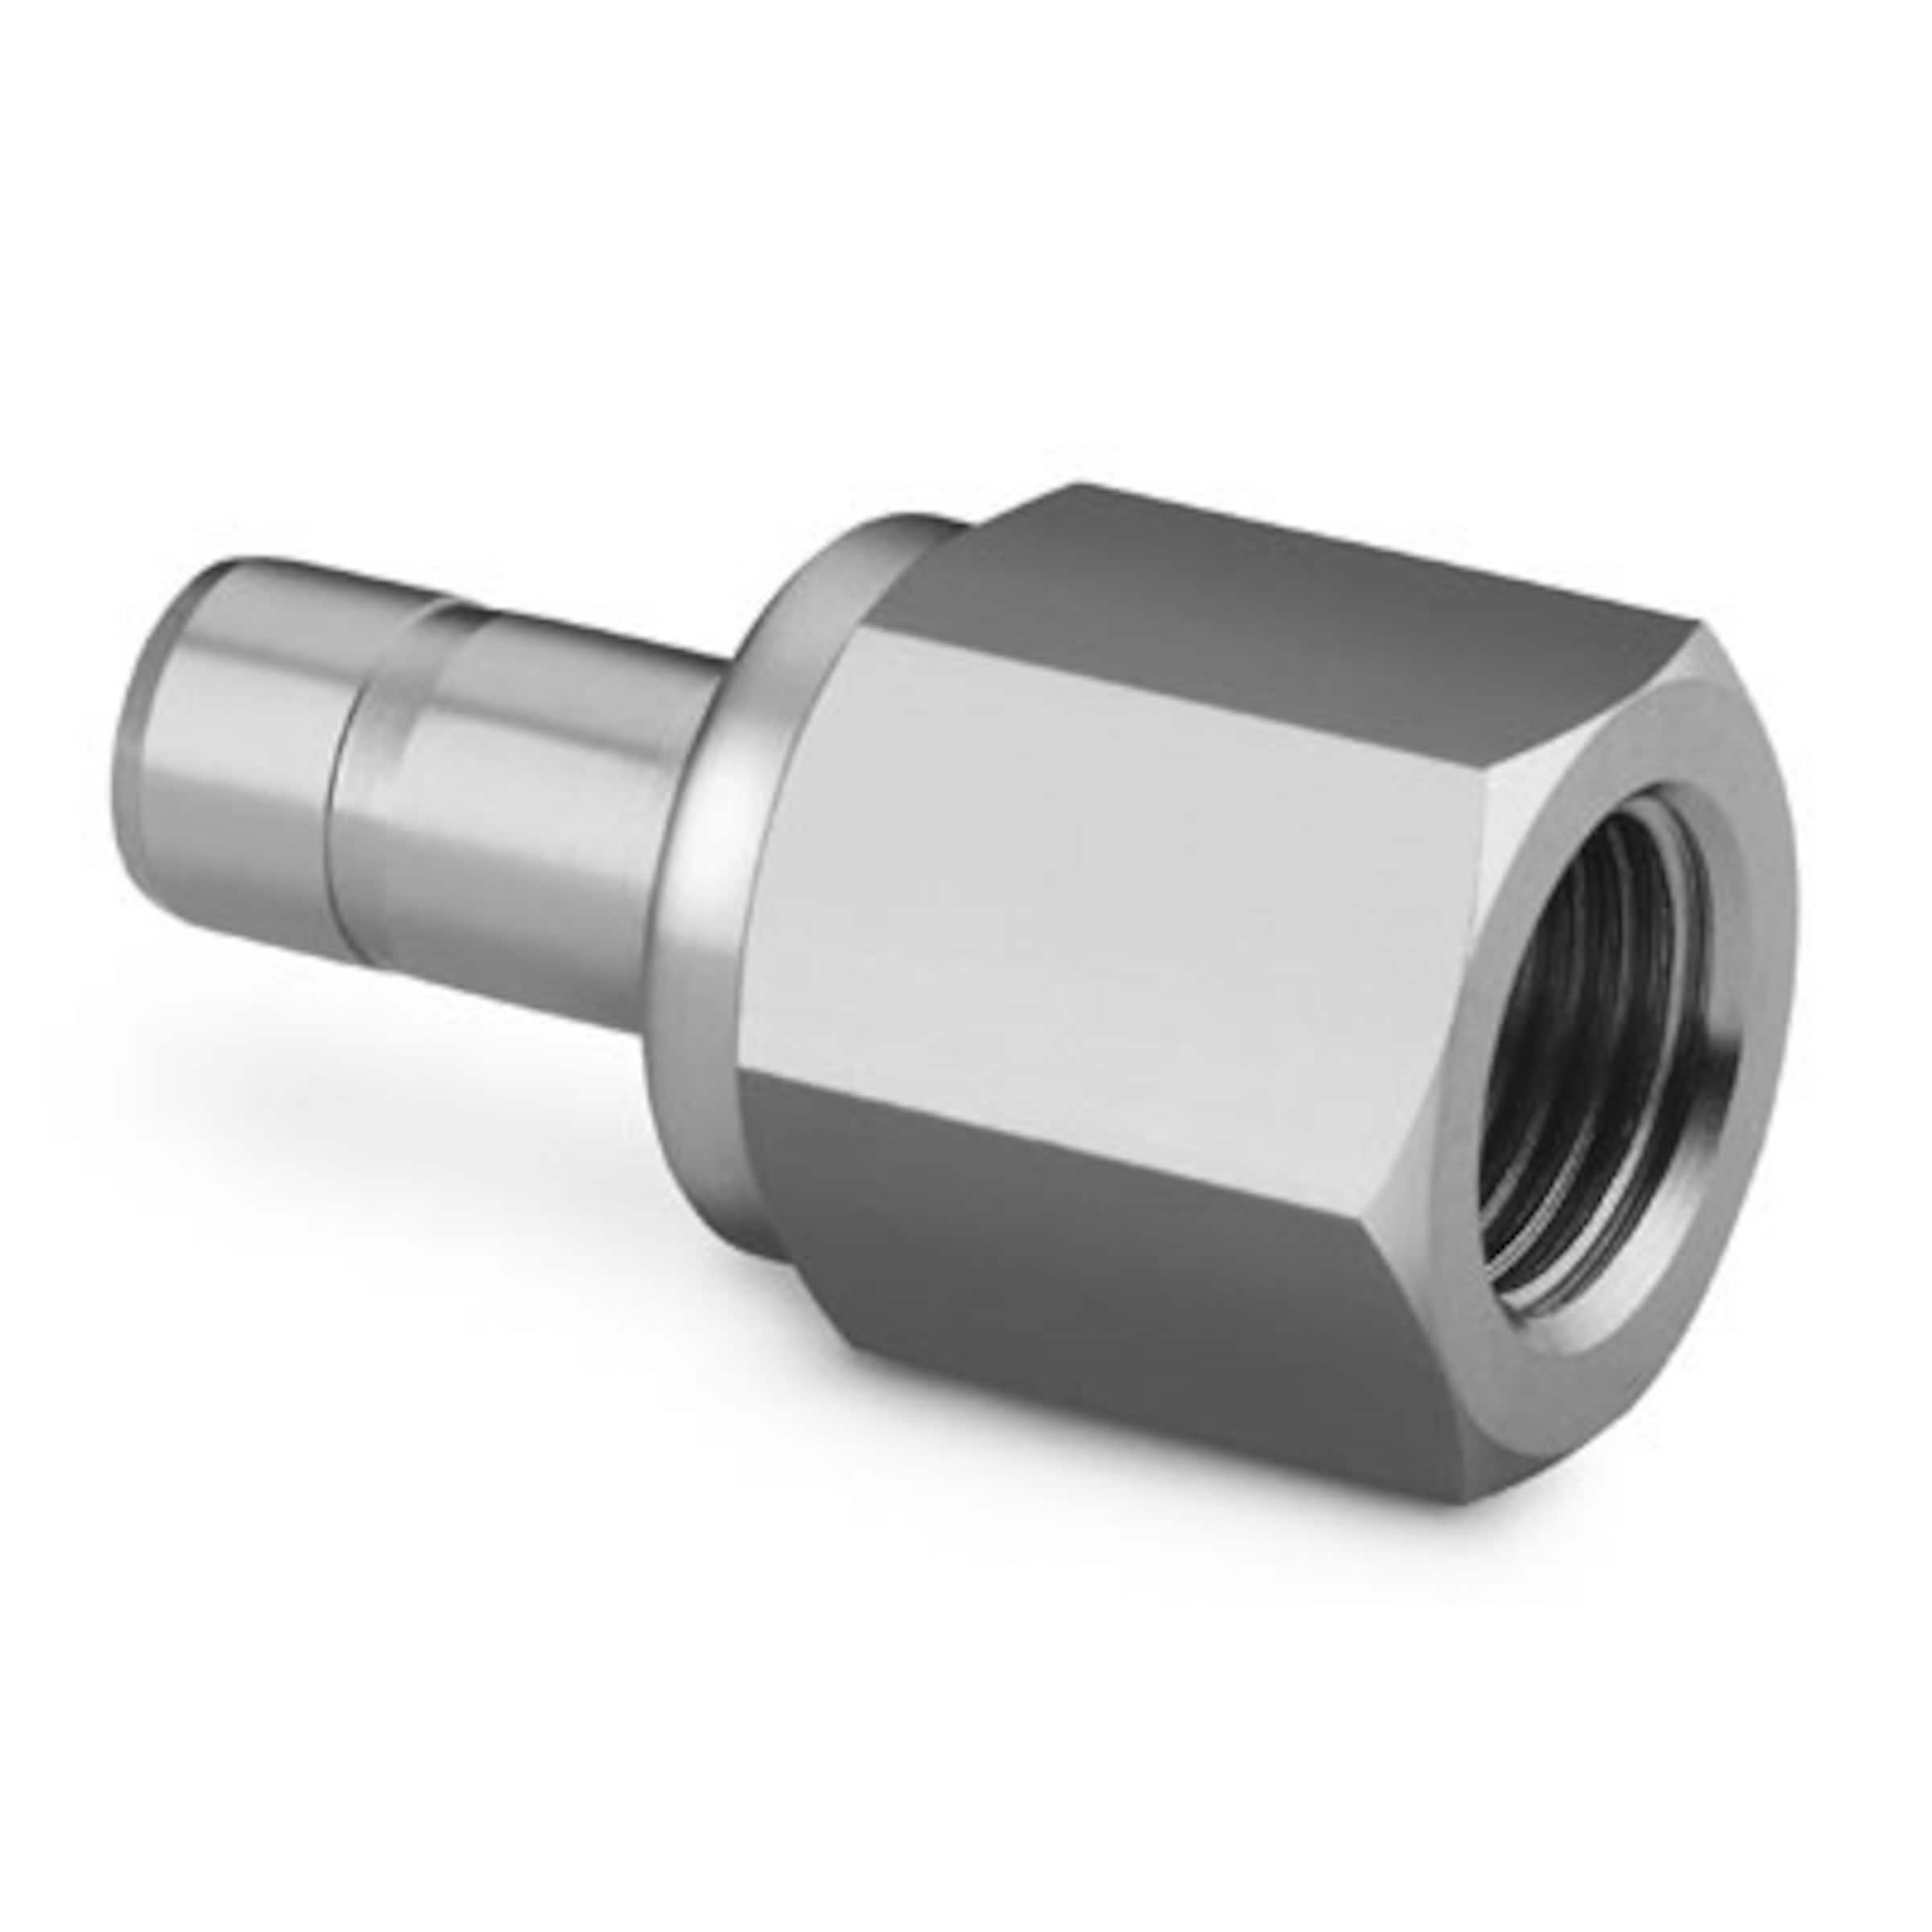 Stainless Steel Swagelok Tube Fitting, Male Connector, 1/4